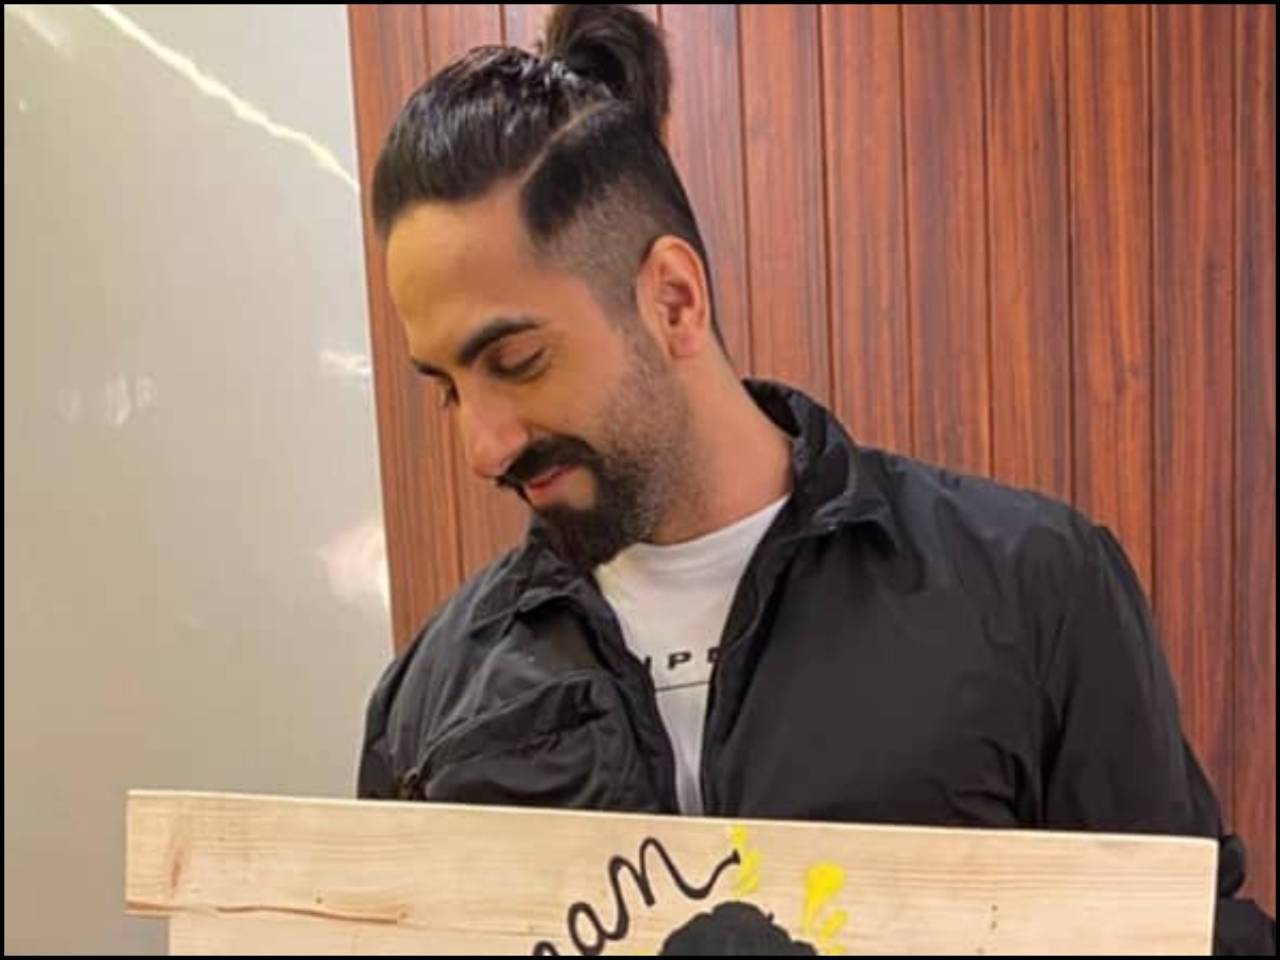 Ayushmann Khurranas New Look From Anubhav Sinhas Anek Has Many Clues  About The Upcoming Film